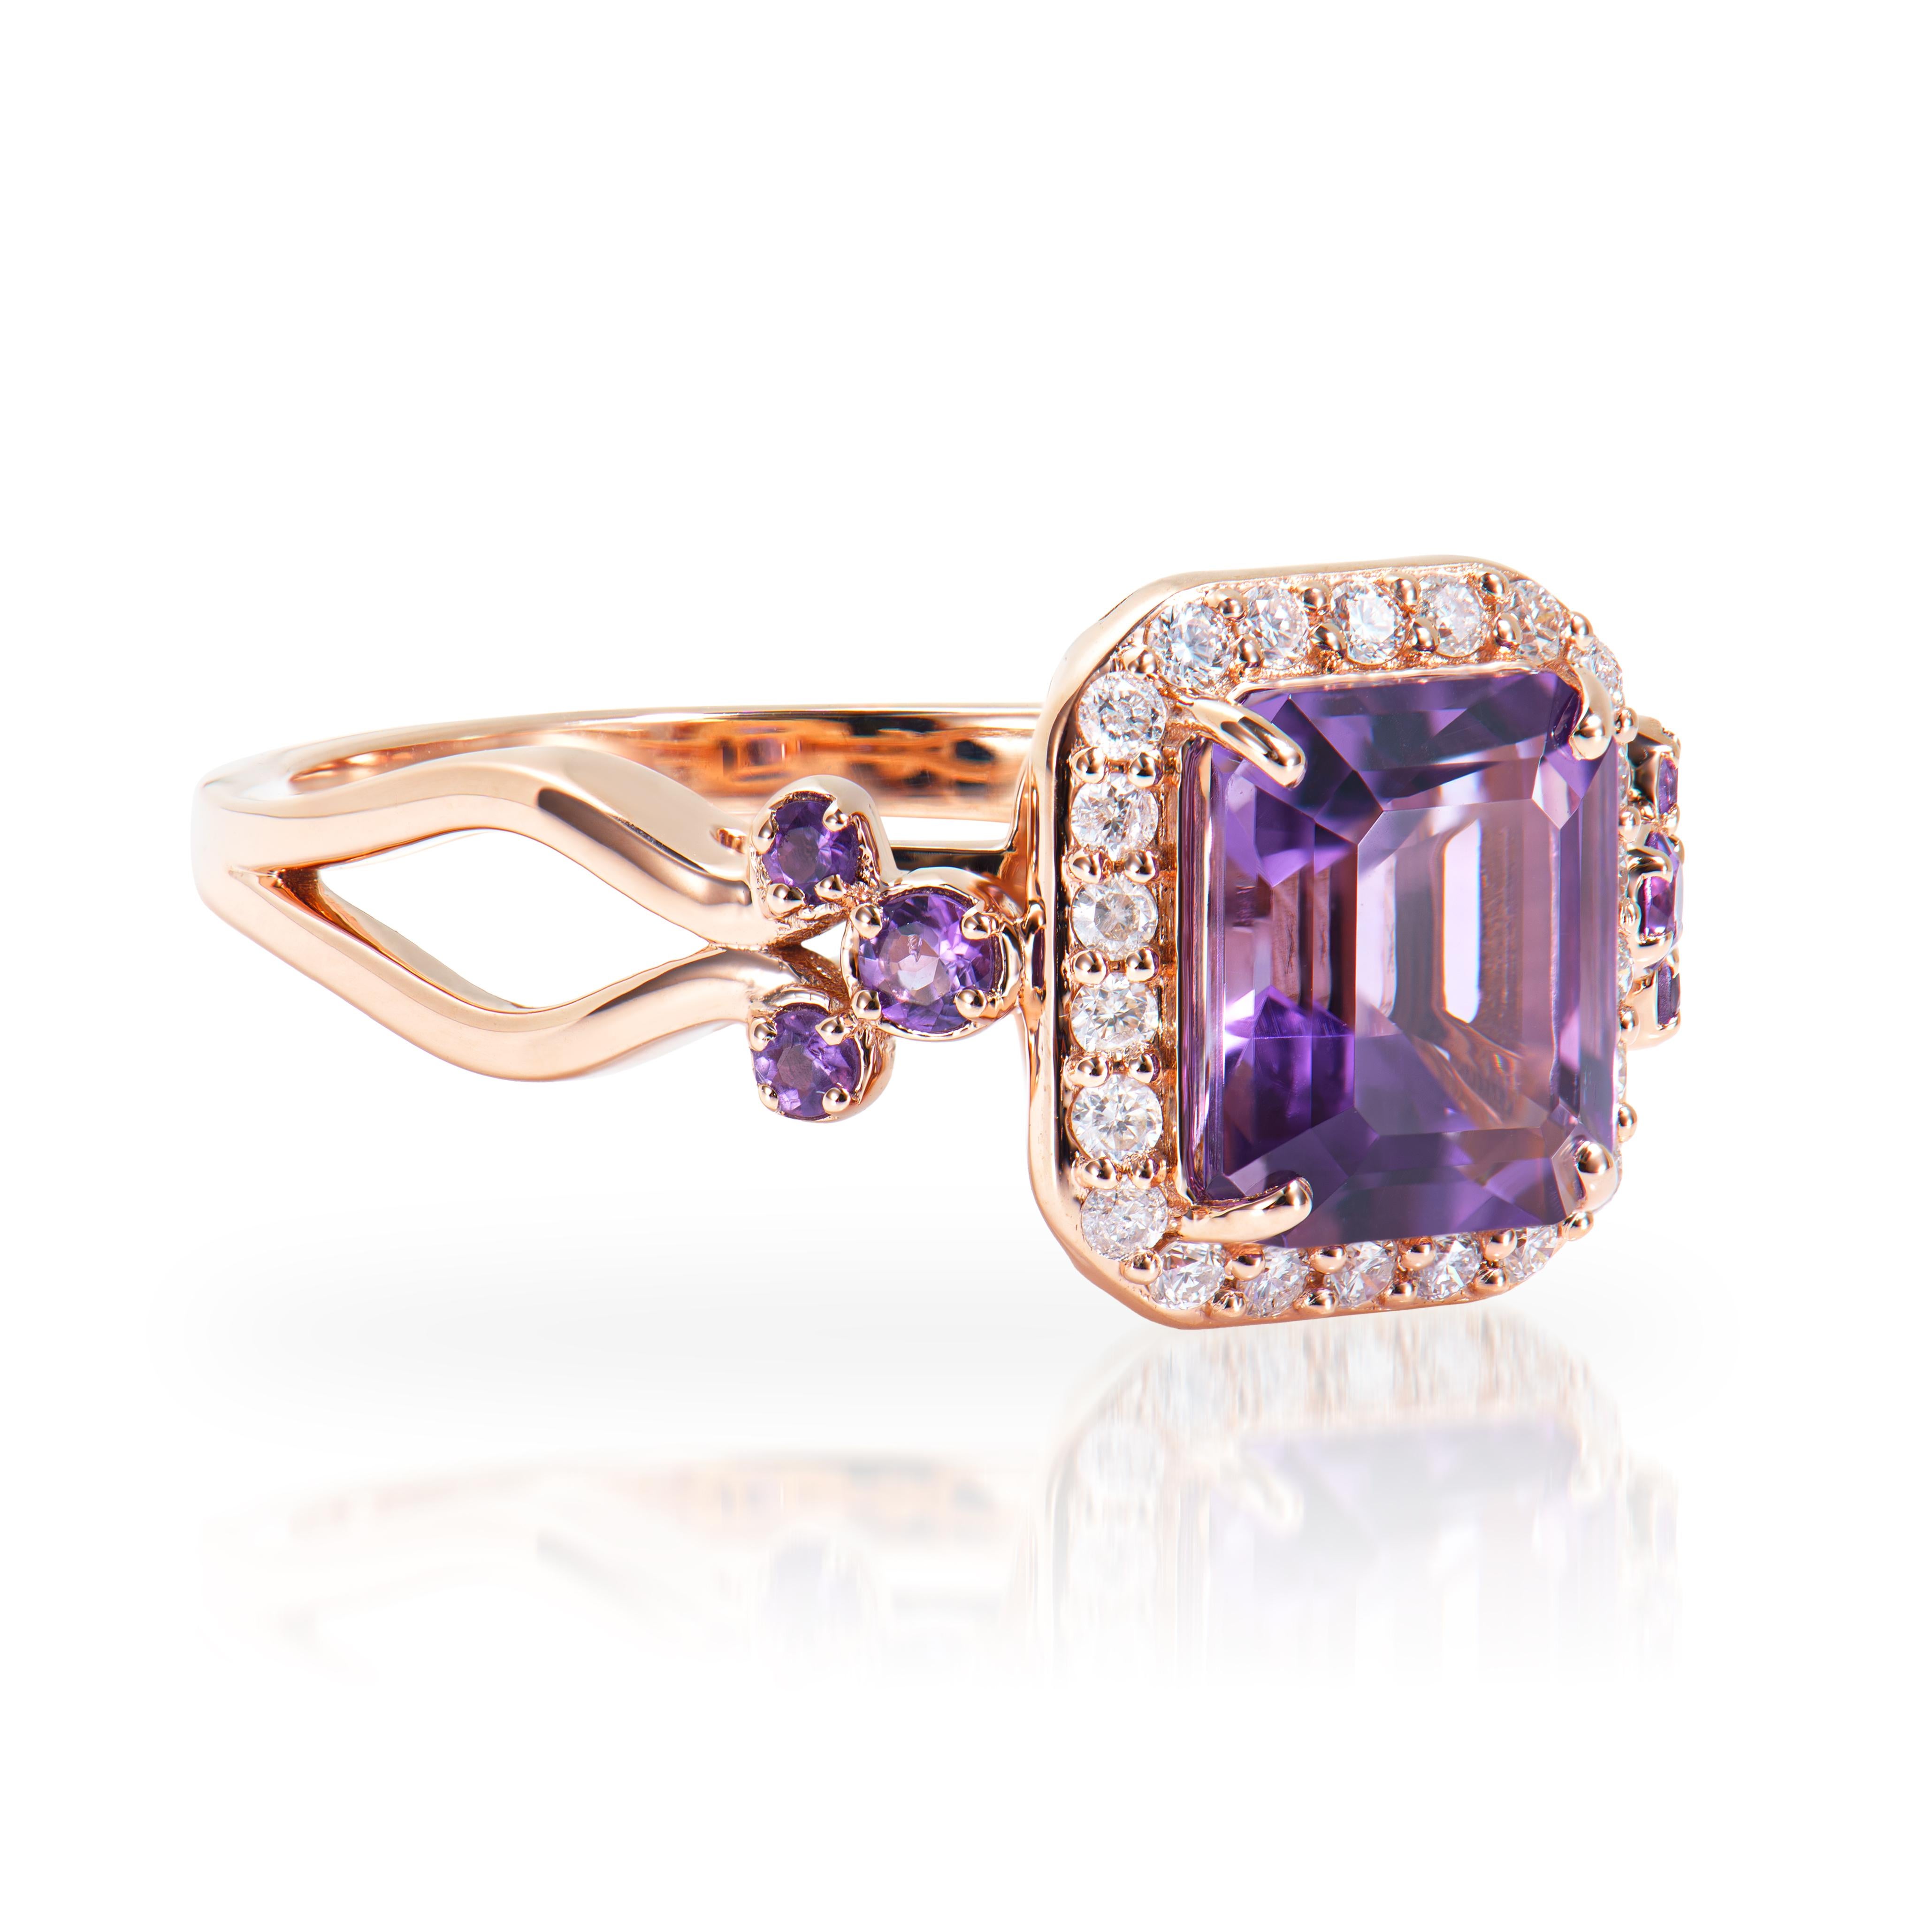 Presented A stunning variety of amethyst gemstones for those who respect quality and wish to wear them on any occasion or everyday basis. The rose gold amethyst fancy ring, embellished with diamonds, has a timeless and exquisite appeal.
  
Amethyst